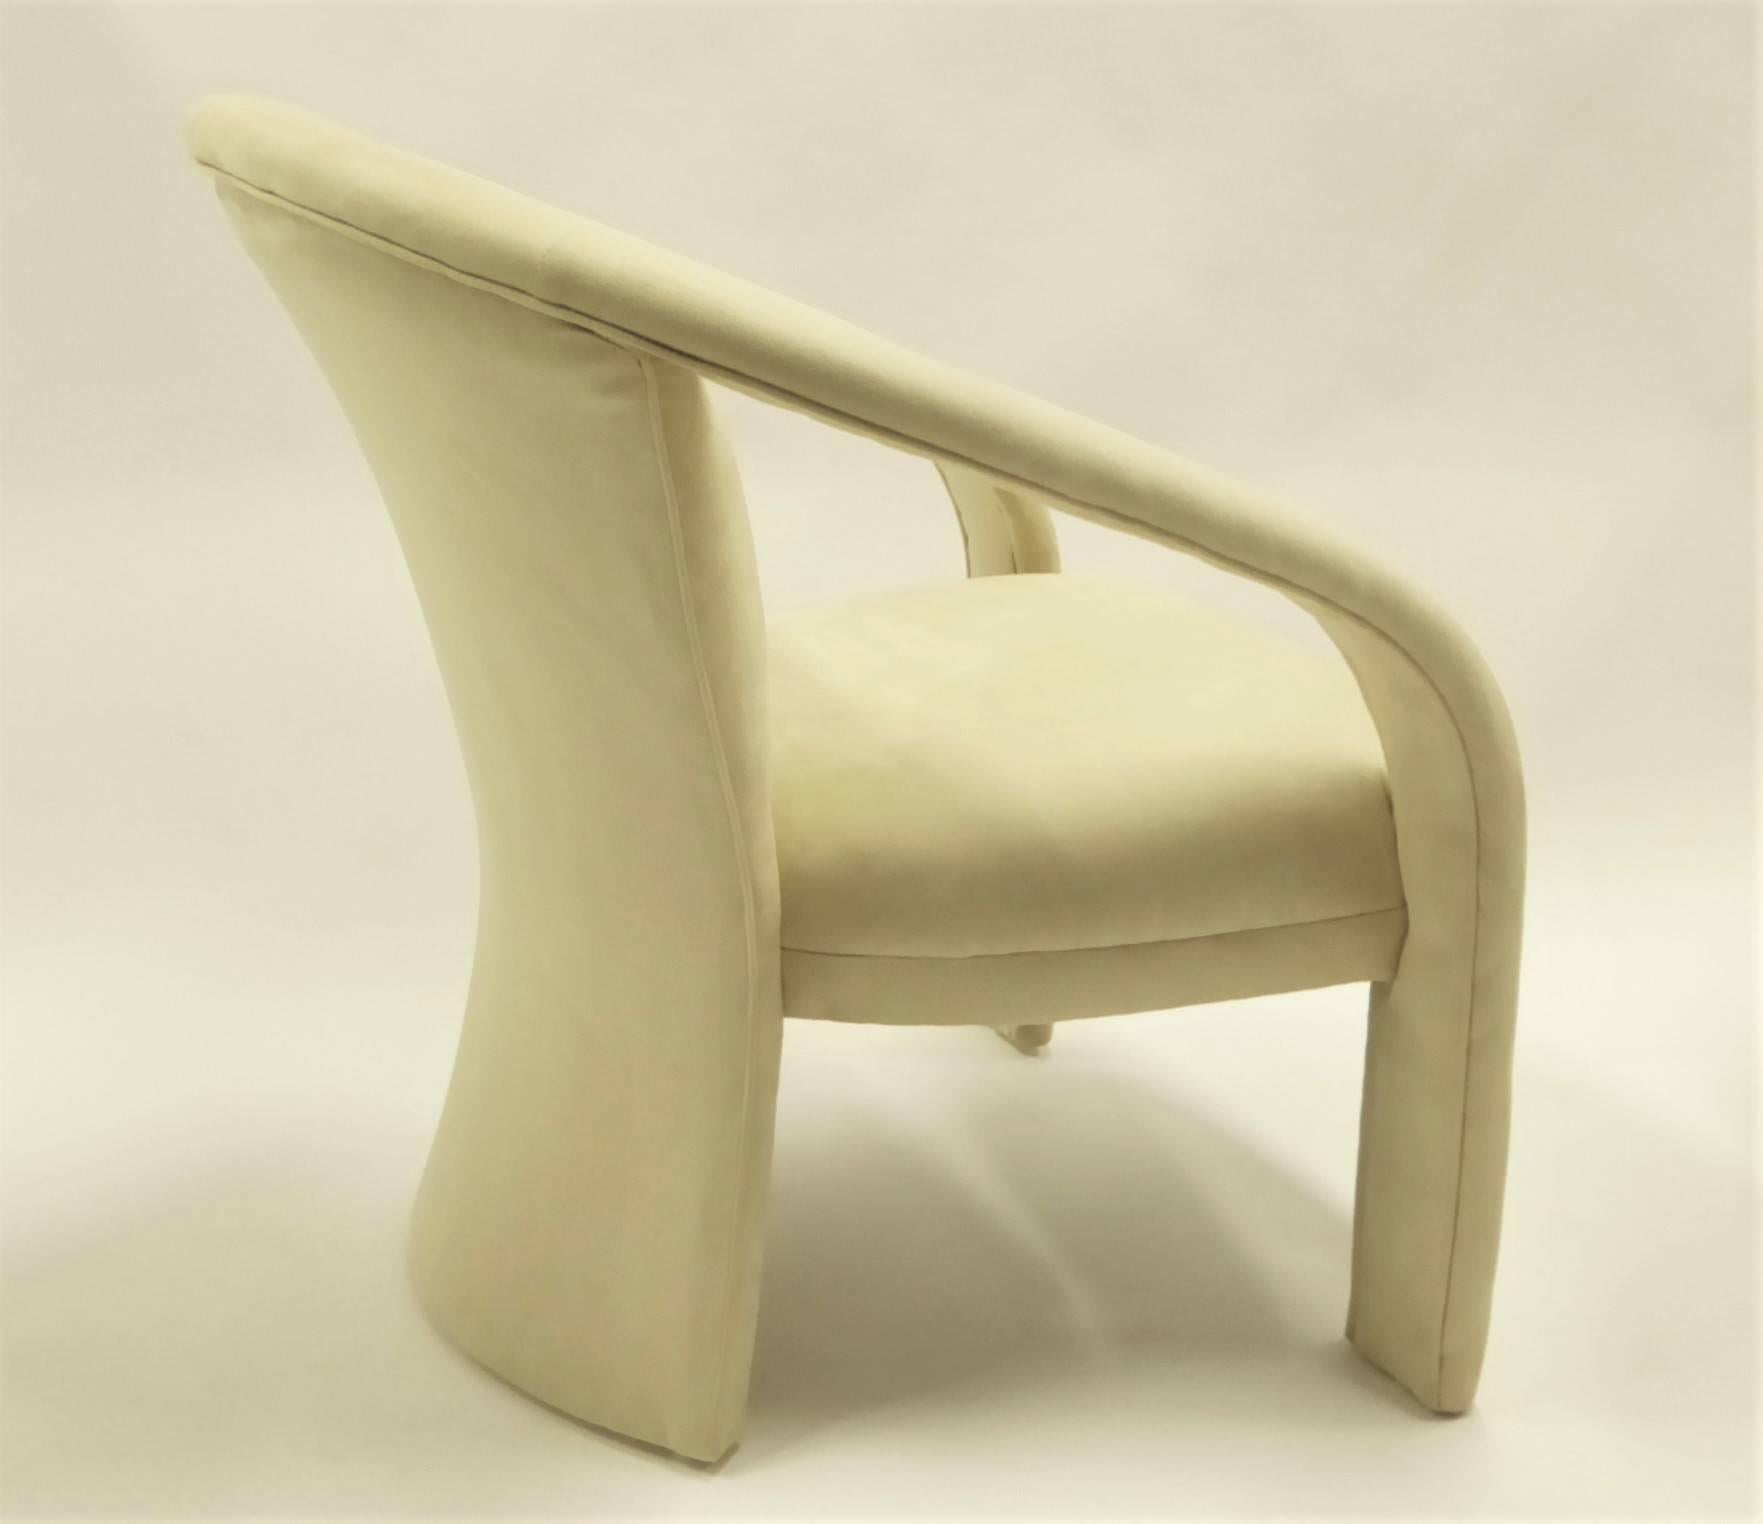 Upholstery Modern Pop Lounge Chairs by Carsons in Ultrasuede